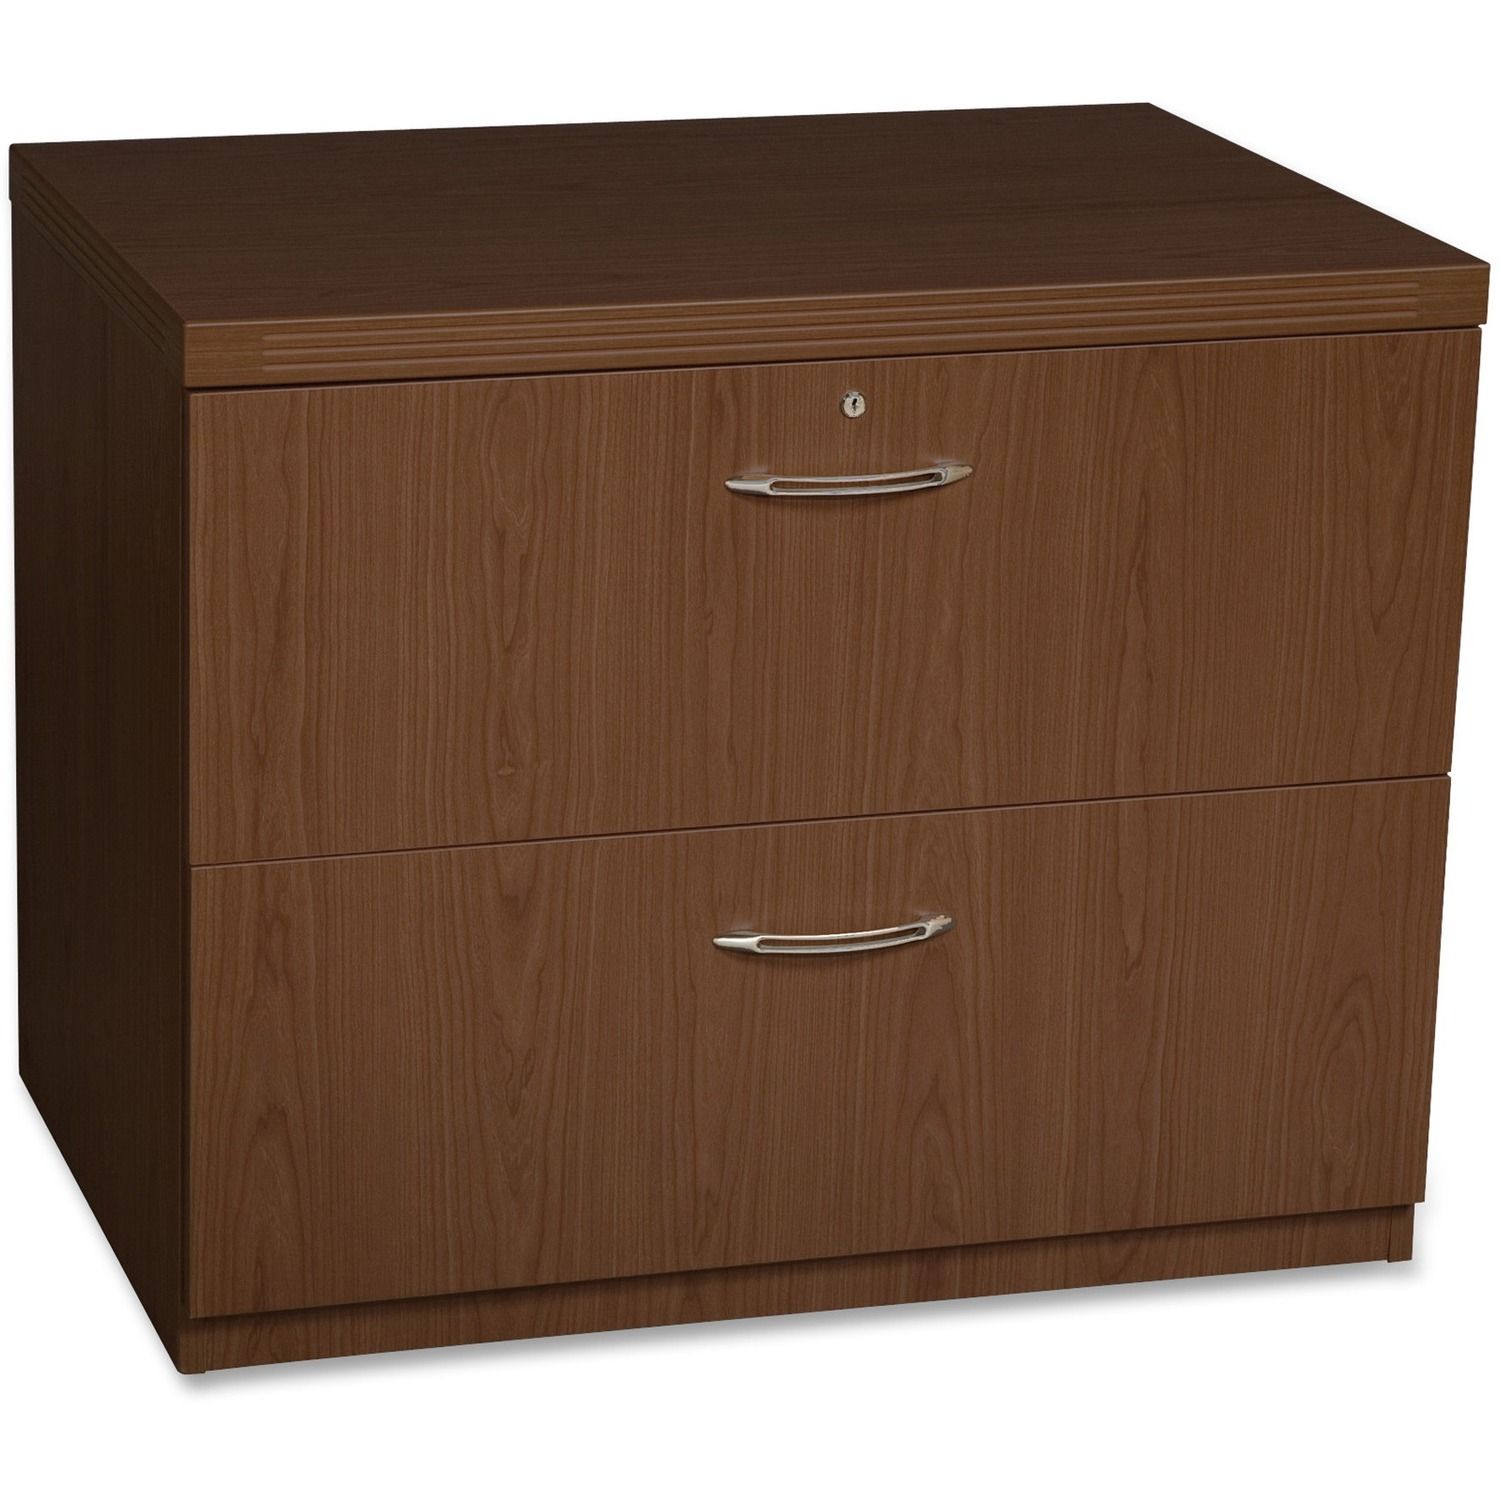 Aberdeen Series Lateral File - 2-Drawer 36" x 24" x 29.5", 2, Fluted Edge, Material: Particleboard, Veneer, Finish: Laminate, Mocha